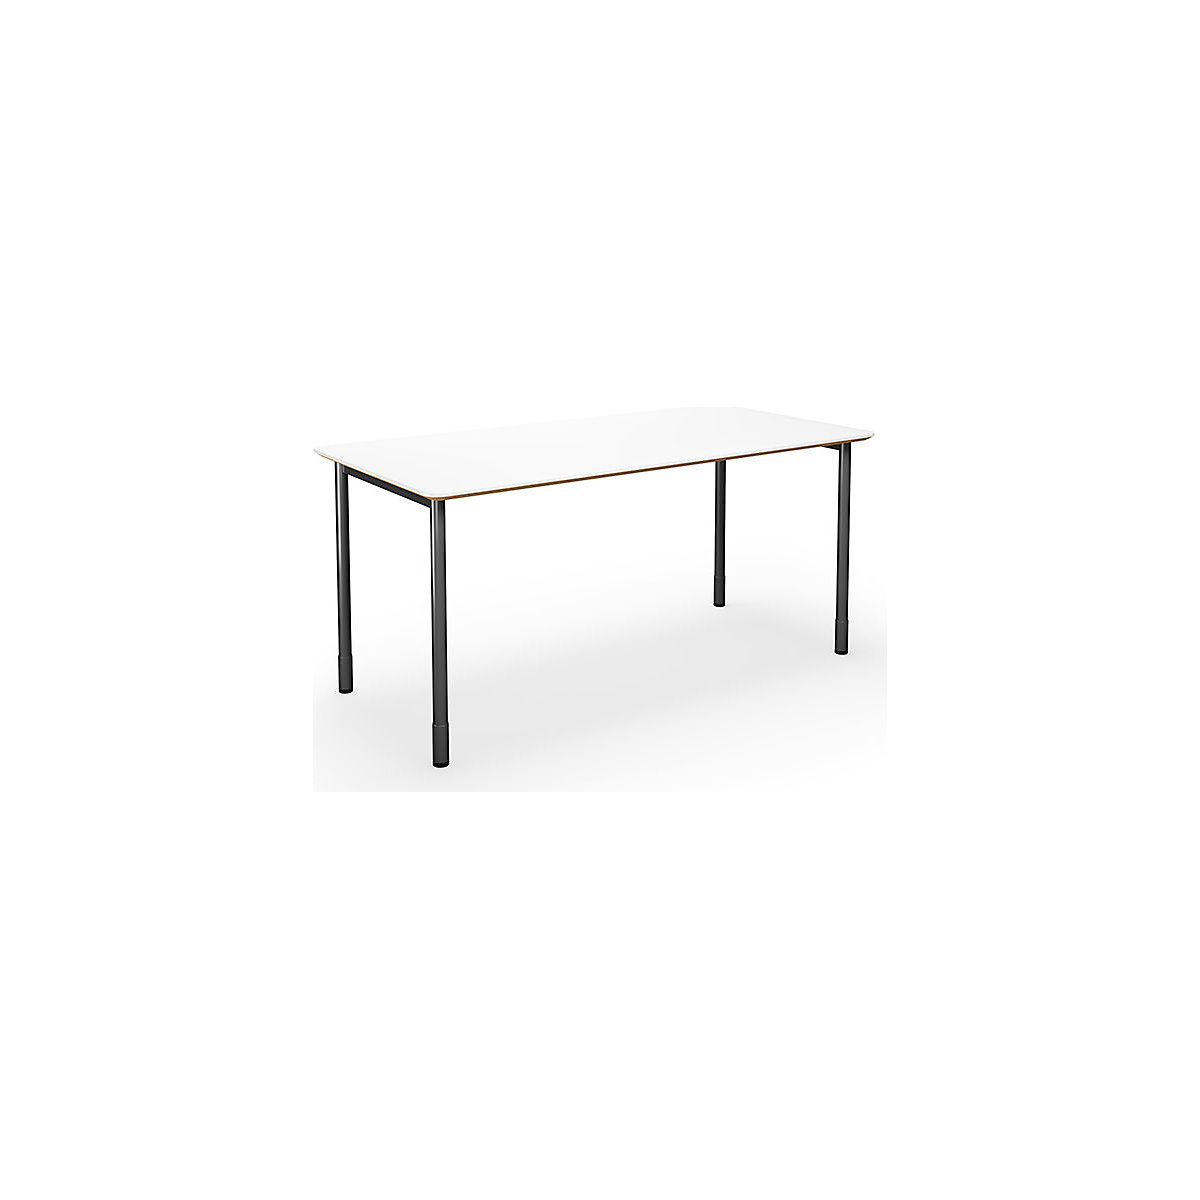 DUO-C Trend multi-purpose desk, straight tabletop, rounded corners, WxD 1400 x 800 mm, white, black-4